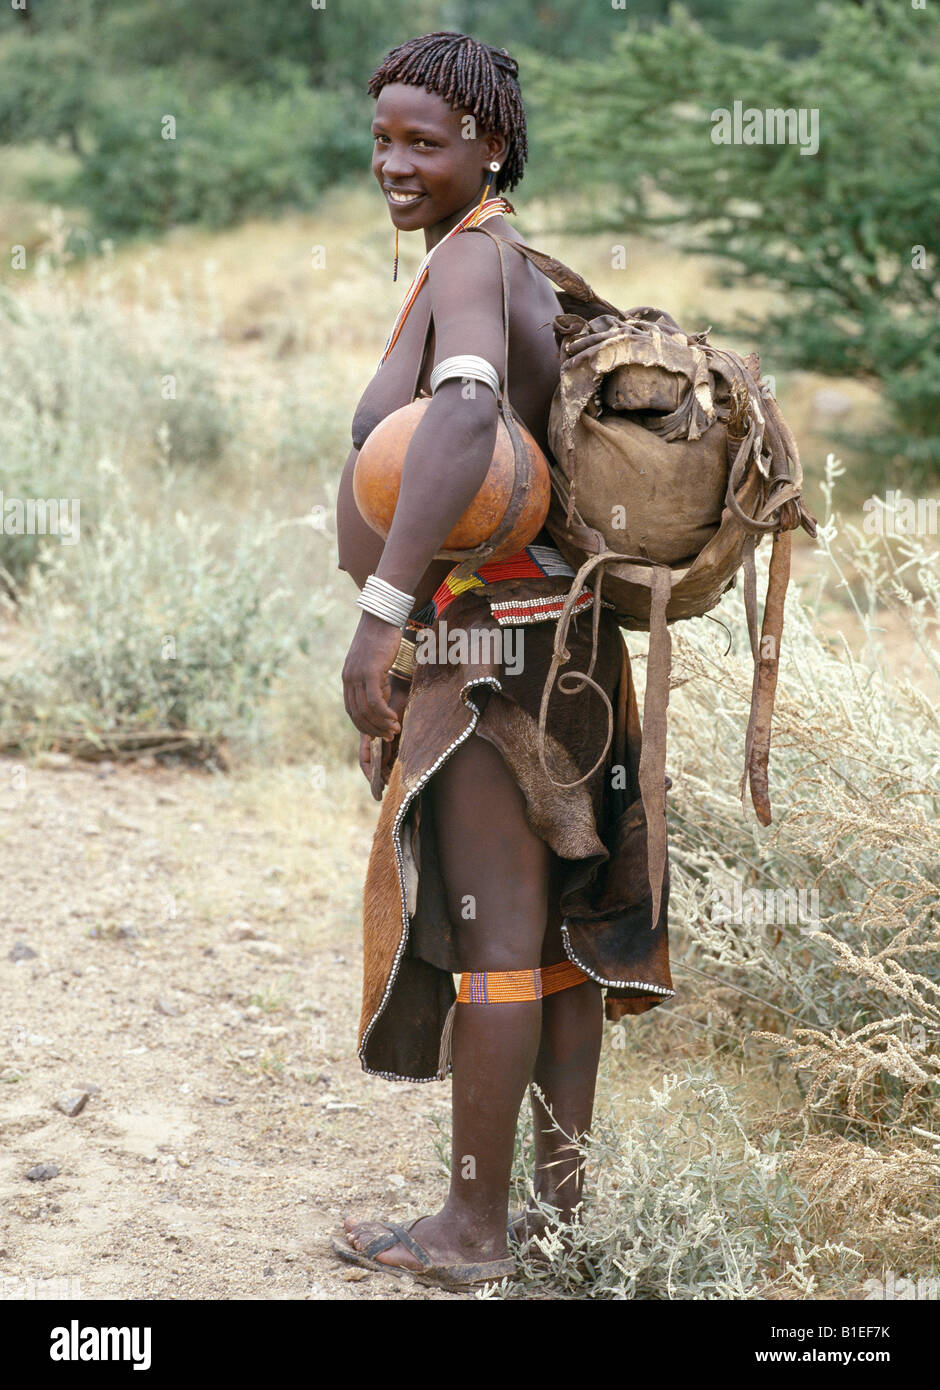 A woman of the Tsemay tribe of remote Southwest Ethiopia wears an attractively decorated leather skirt and apron. Stock Photo